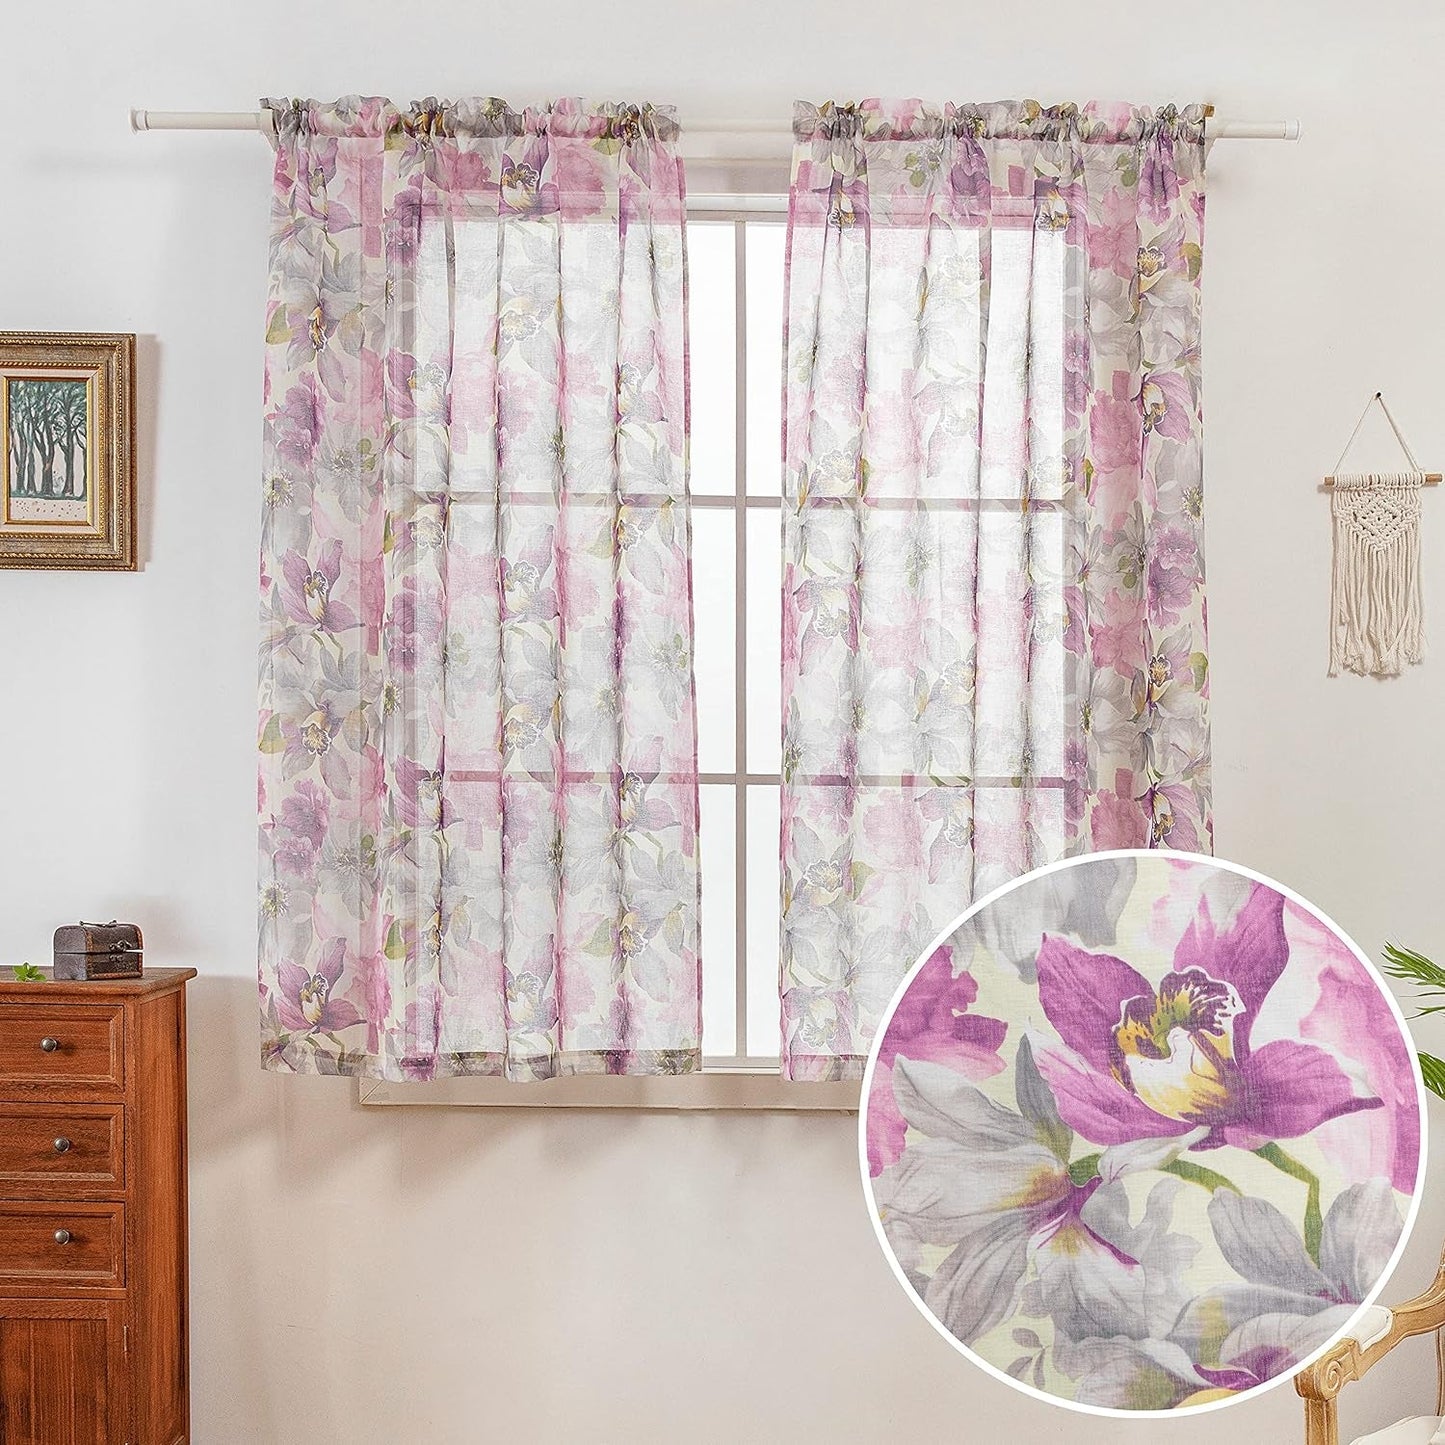 Floral Sheer Curtains 63 Inch Length Purple Flower Printed French Country Semi Sheer Curtain for Girls Bedroom Living Room Linen Look Blossom Patterned Rod Pocket Voile Drapes 2 Panels